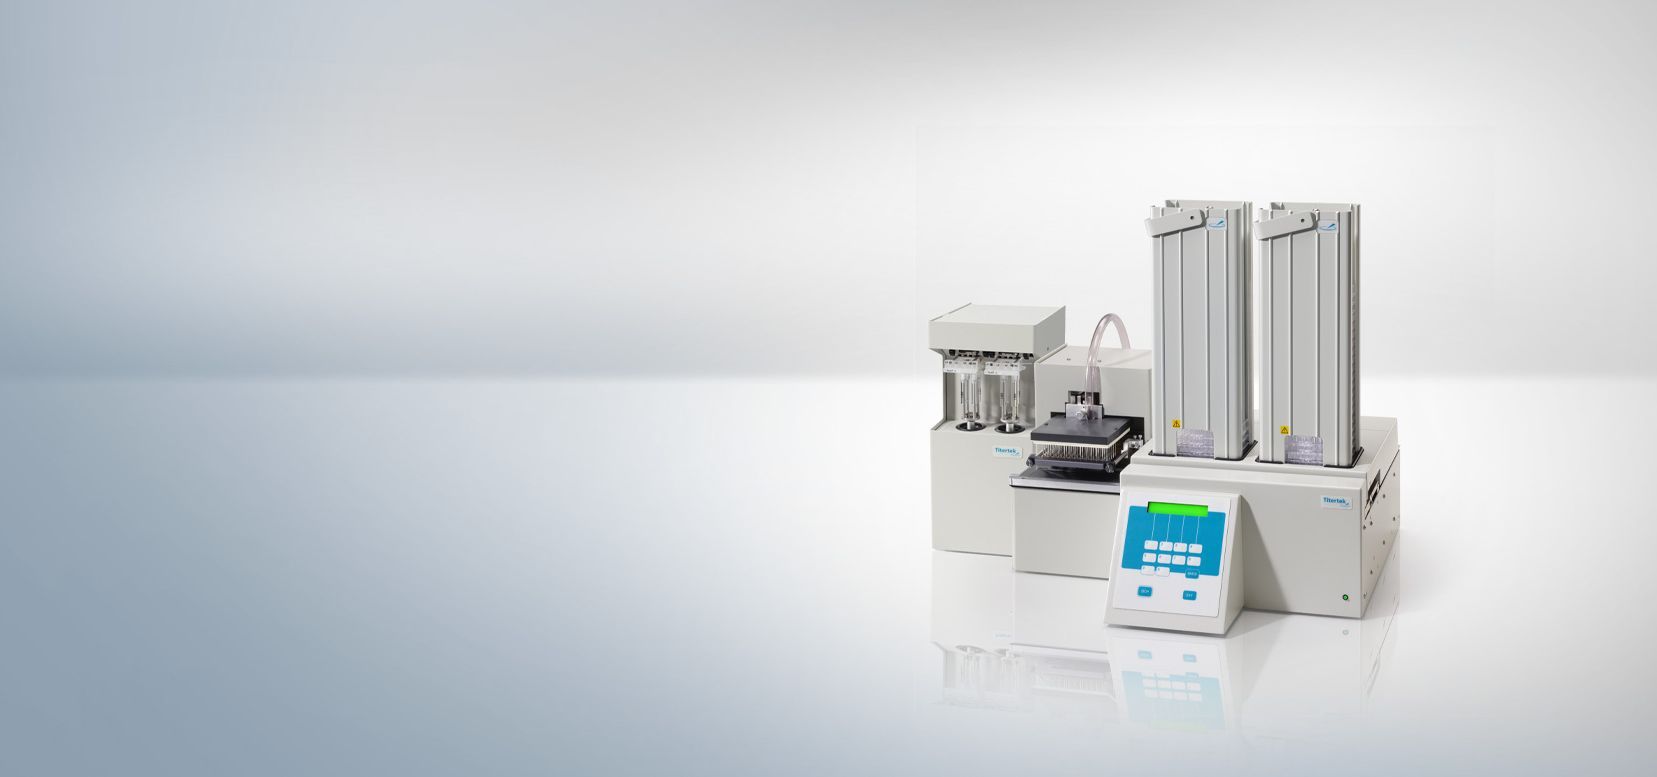 Zoom HT LB 920 Plate Coating System - Berthold Technologies GmbH